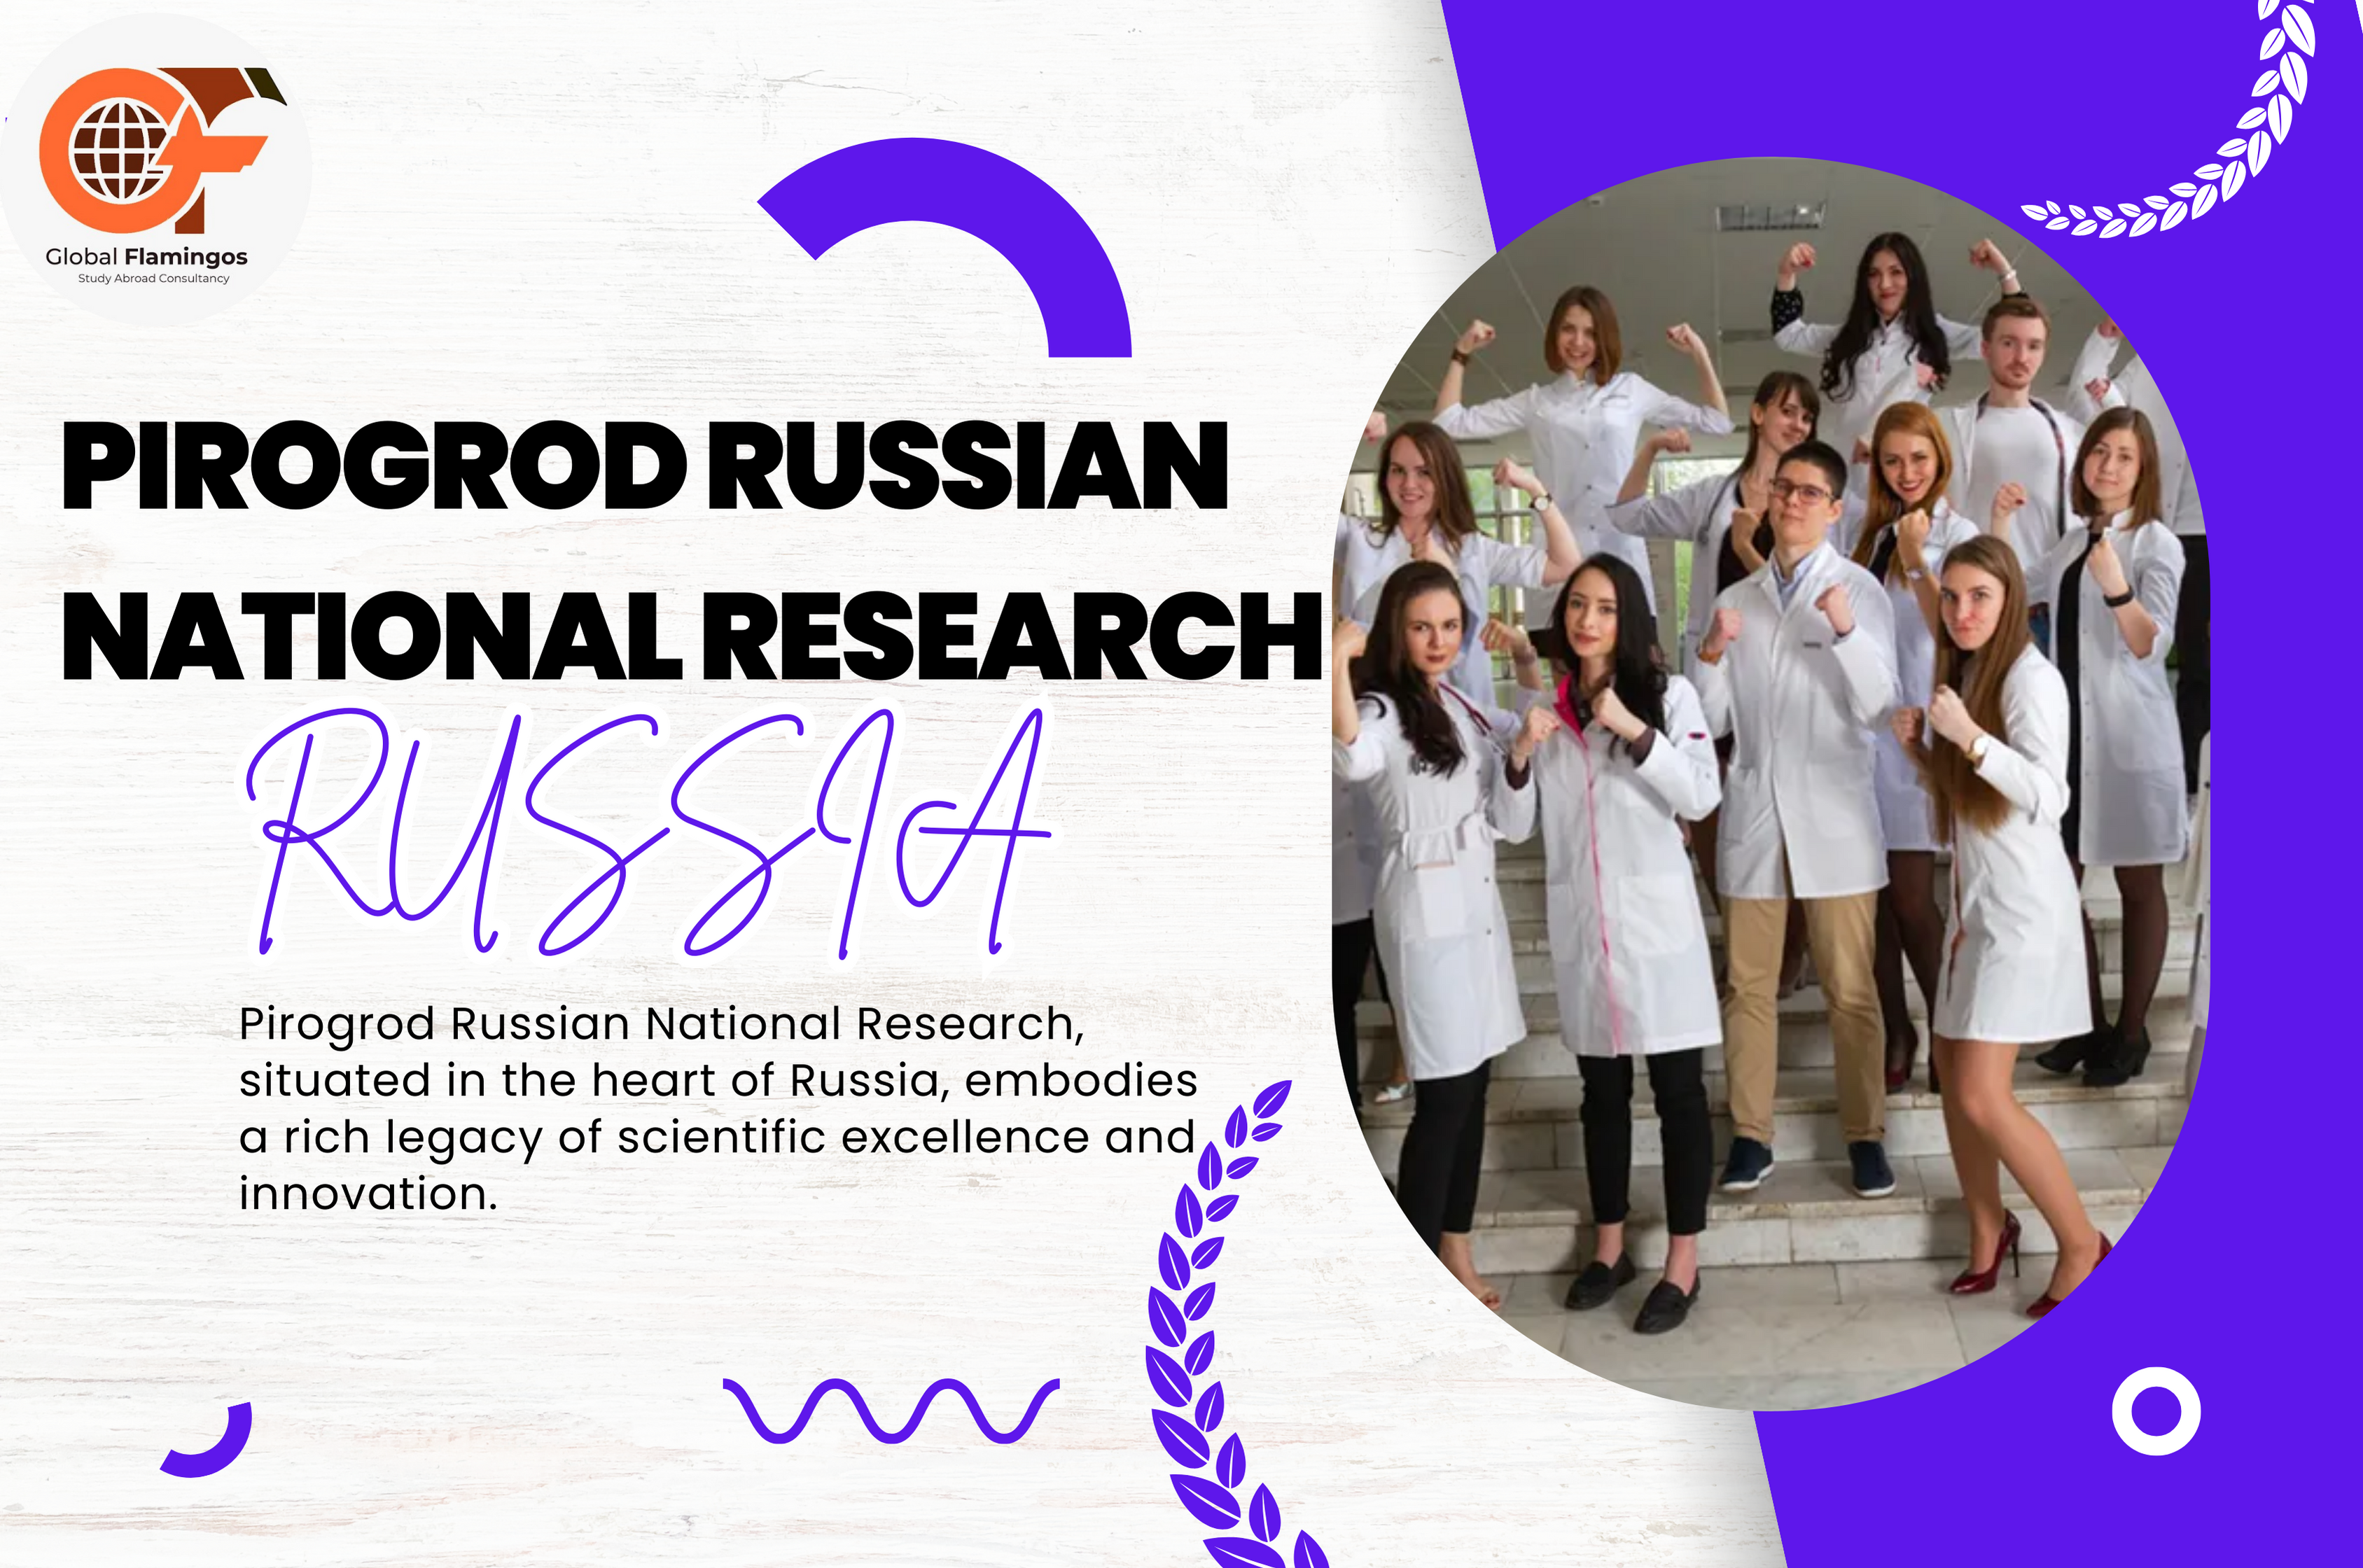 Pirogrod Russian National Research